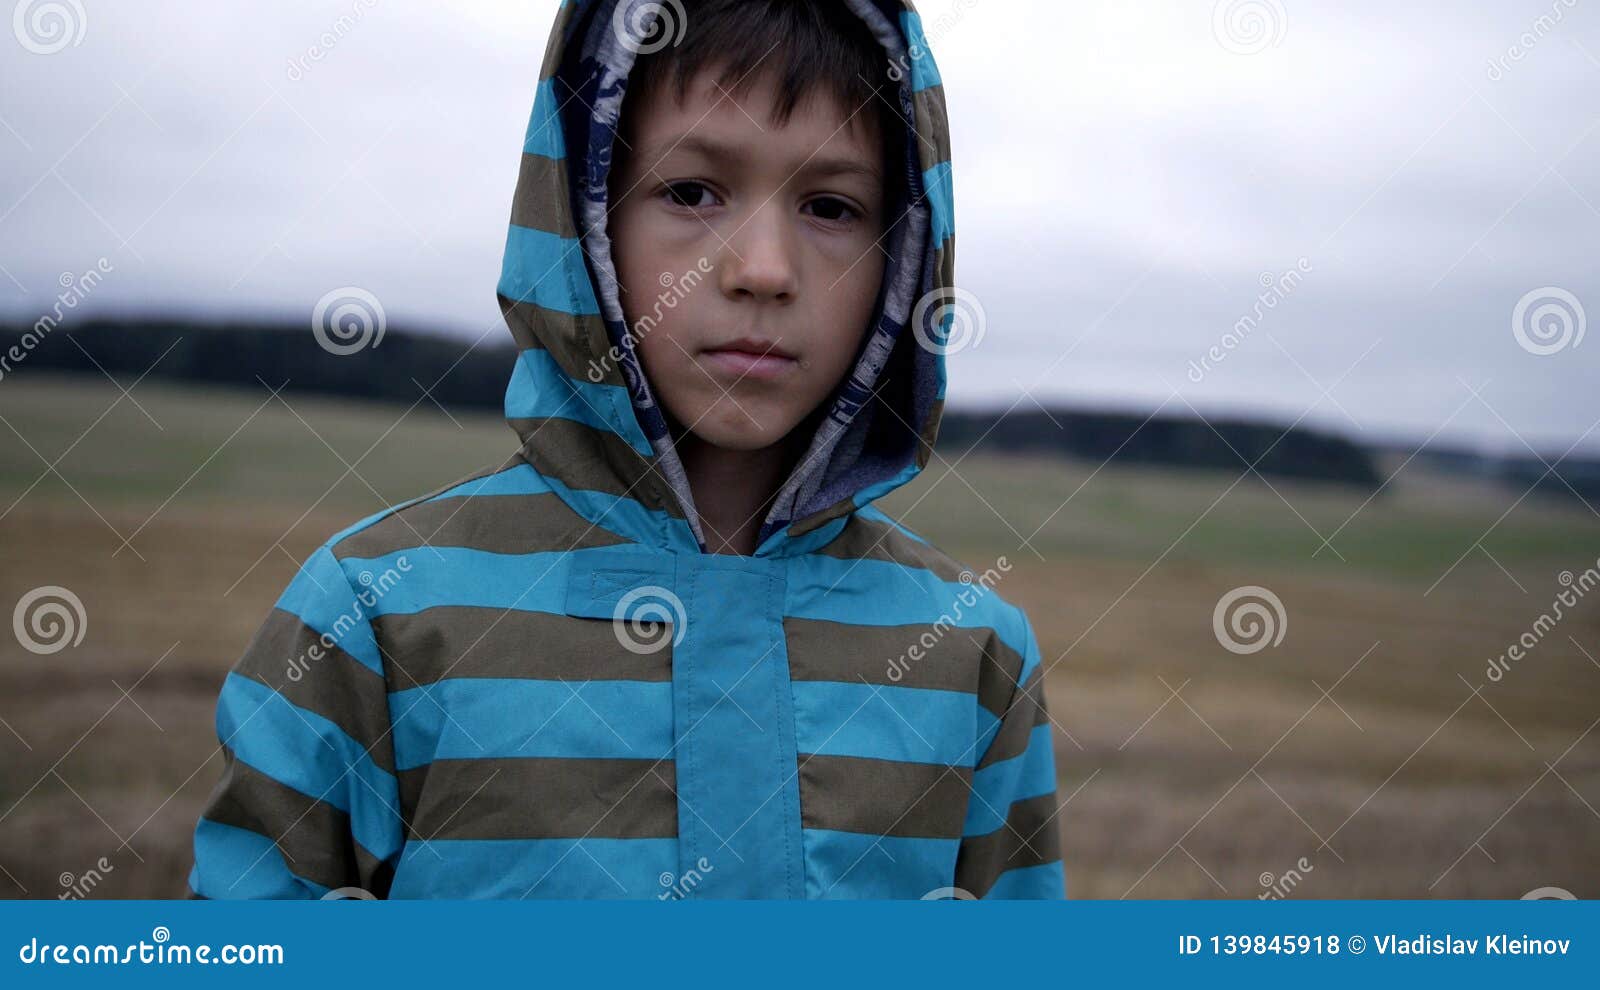 Refugee Boy Looks Compassionately at the Camera, Homeless Boy, Pain on ...